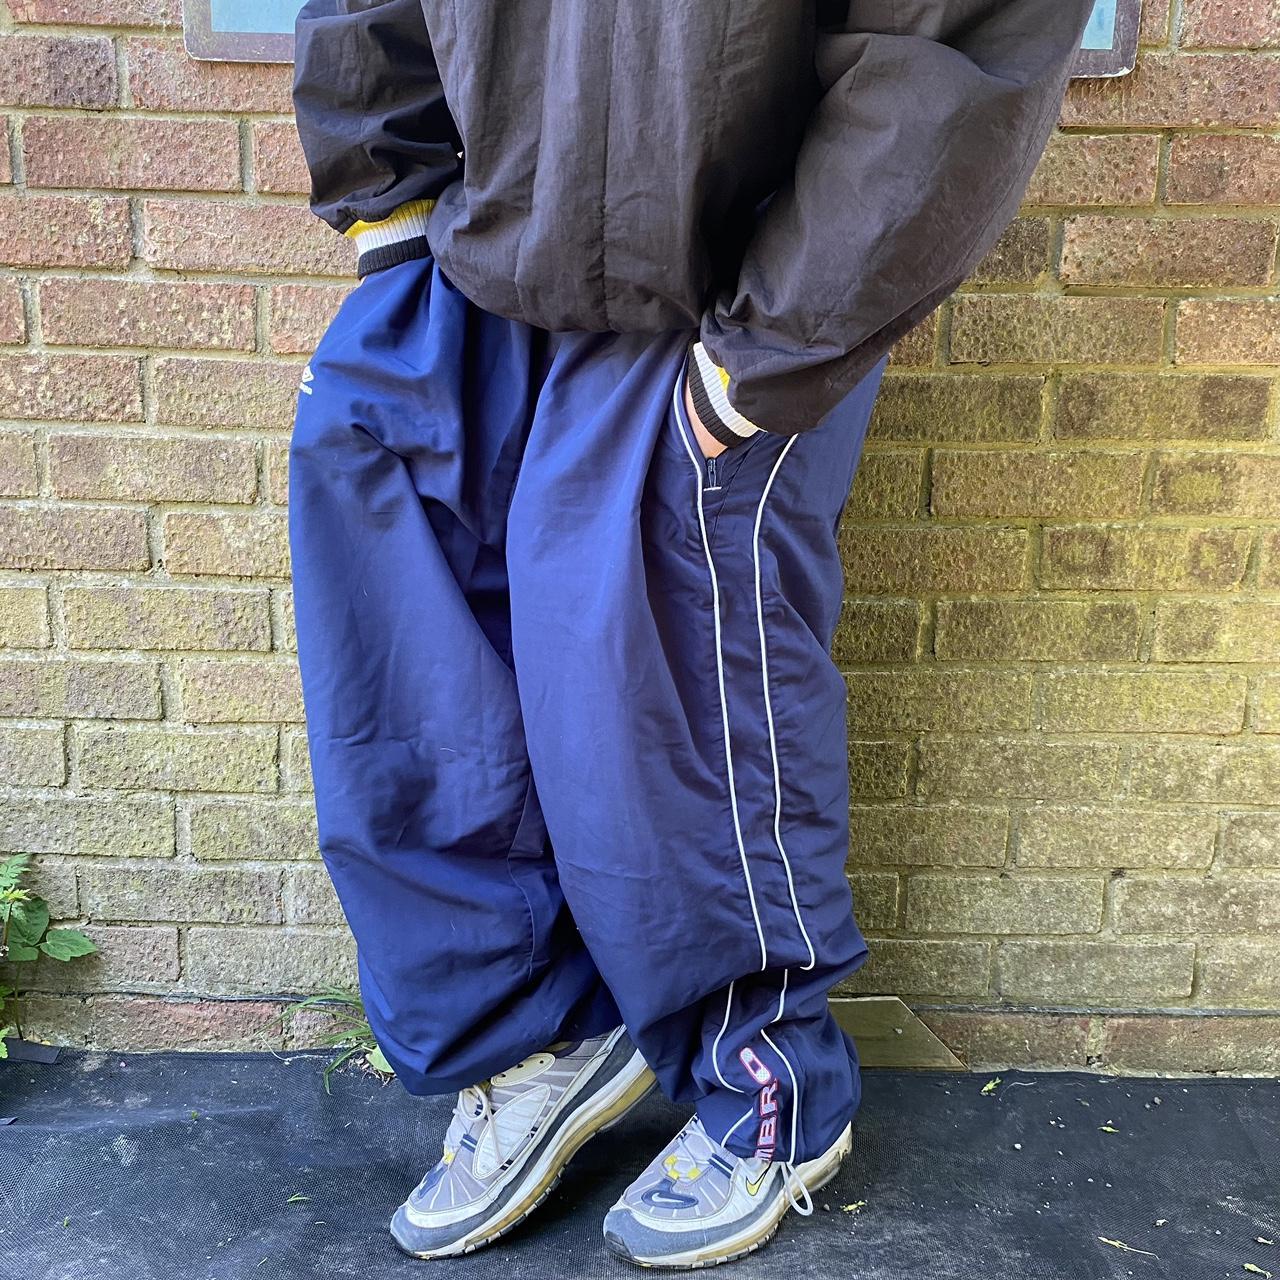 Umbro Men's White and Navy Joggers-tracksuits | Depop